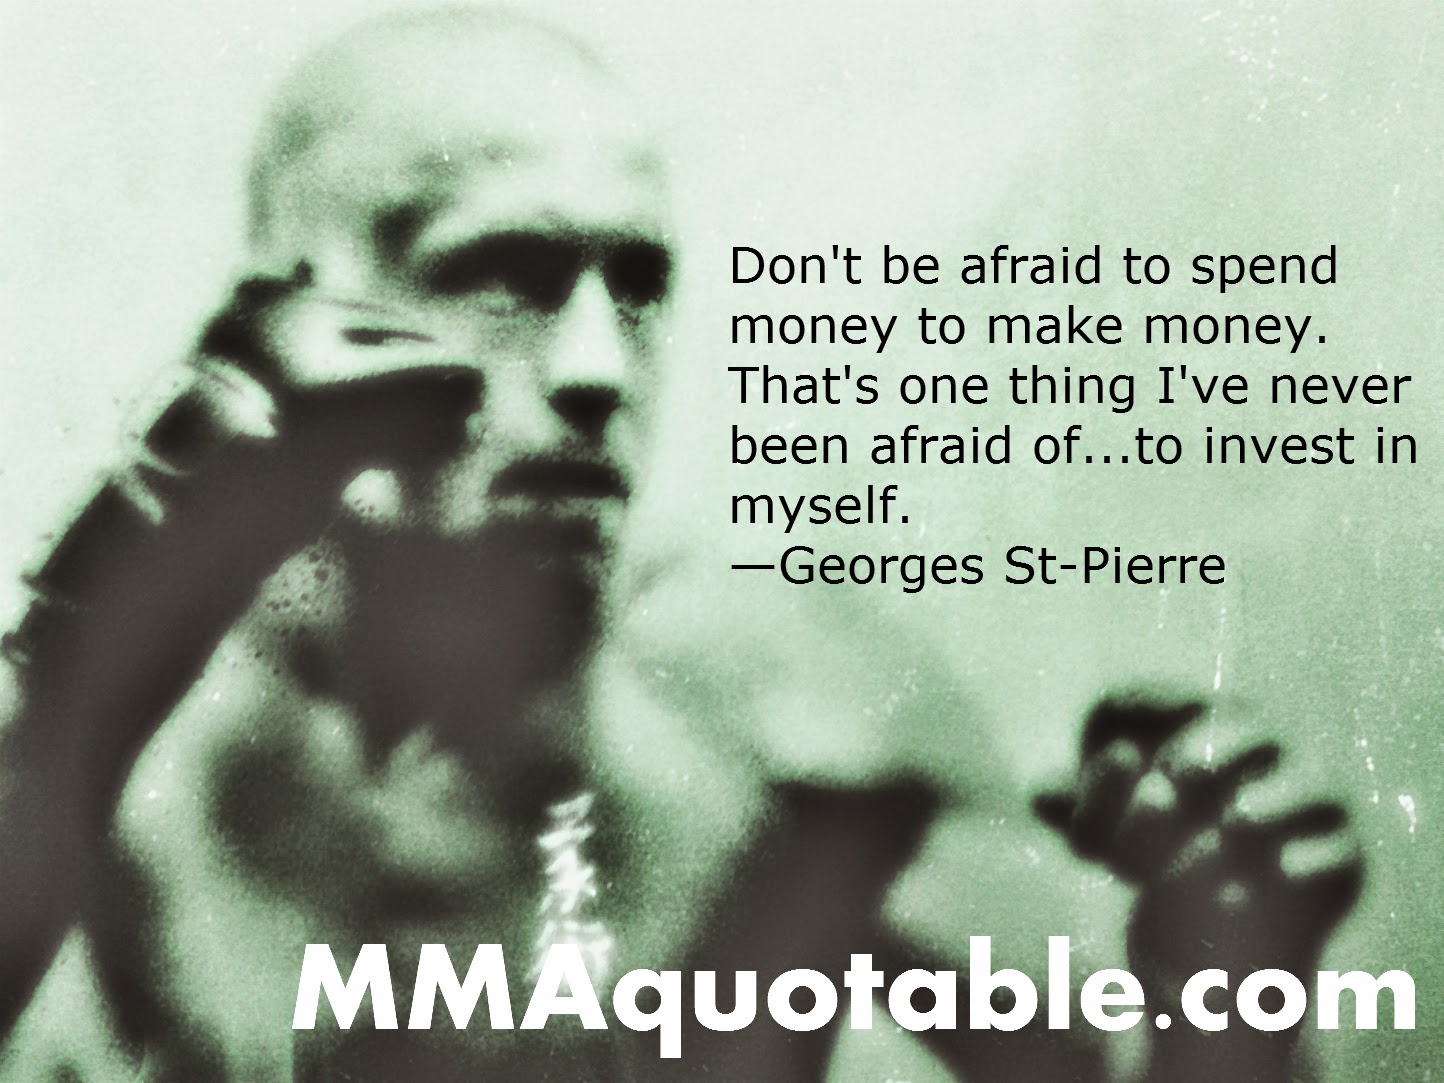 Georges St-Pierre Quote: “If you look good, you feel good, and if you feel  good